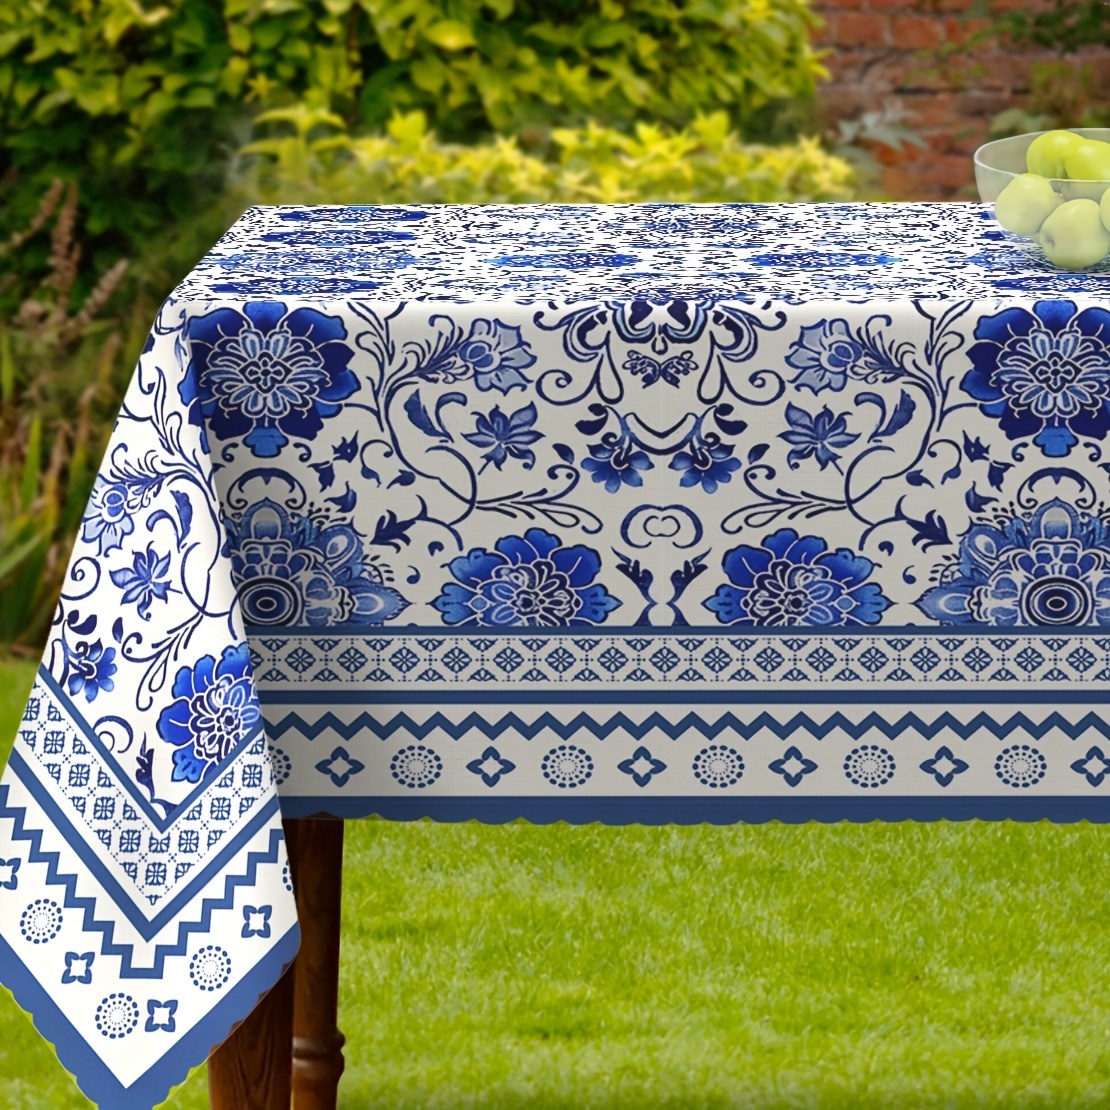 

Vintage Blue & Pearl White Floral Tablecloth - Waterproof, Wrinkle-free Polyester Rectangle Cover For Indoor/outdoor Dining, Perfect For Everyday Meals & Home Decor